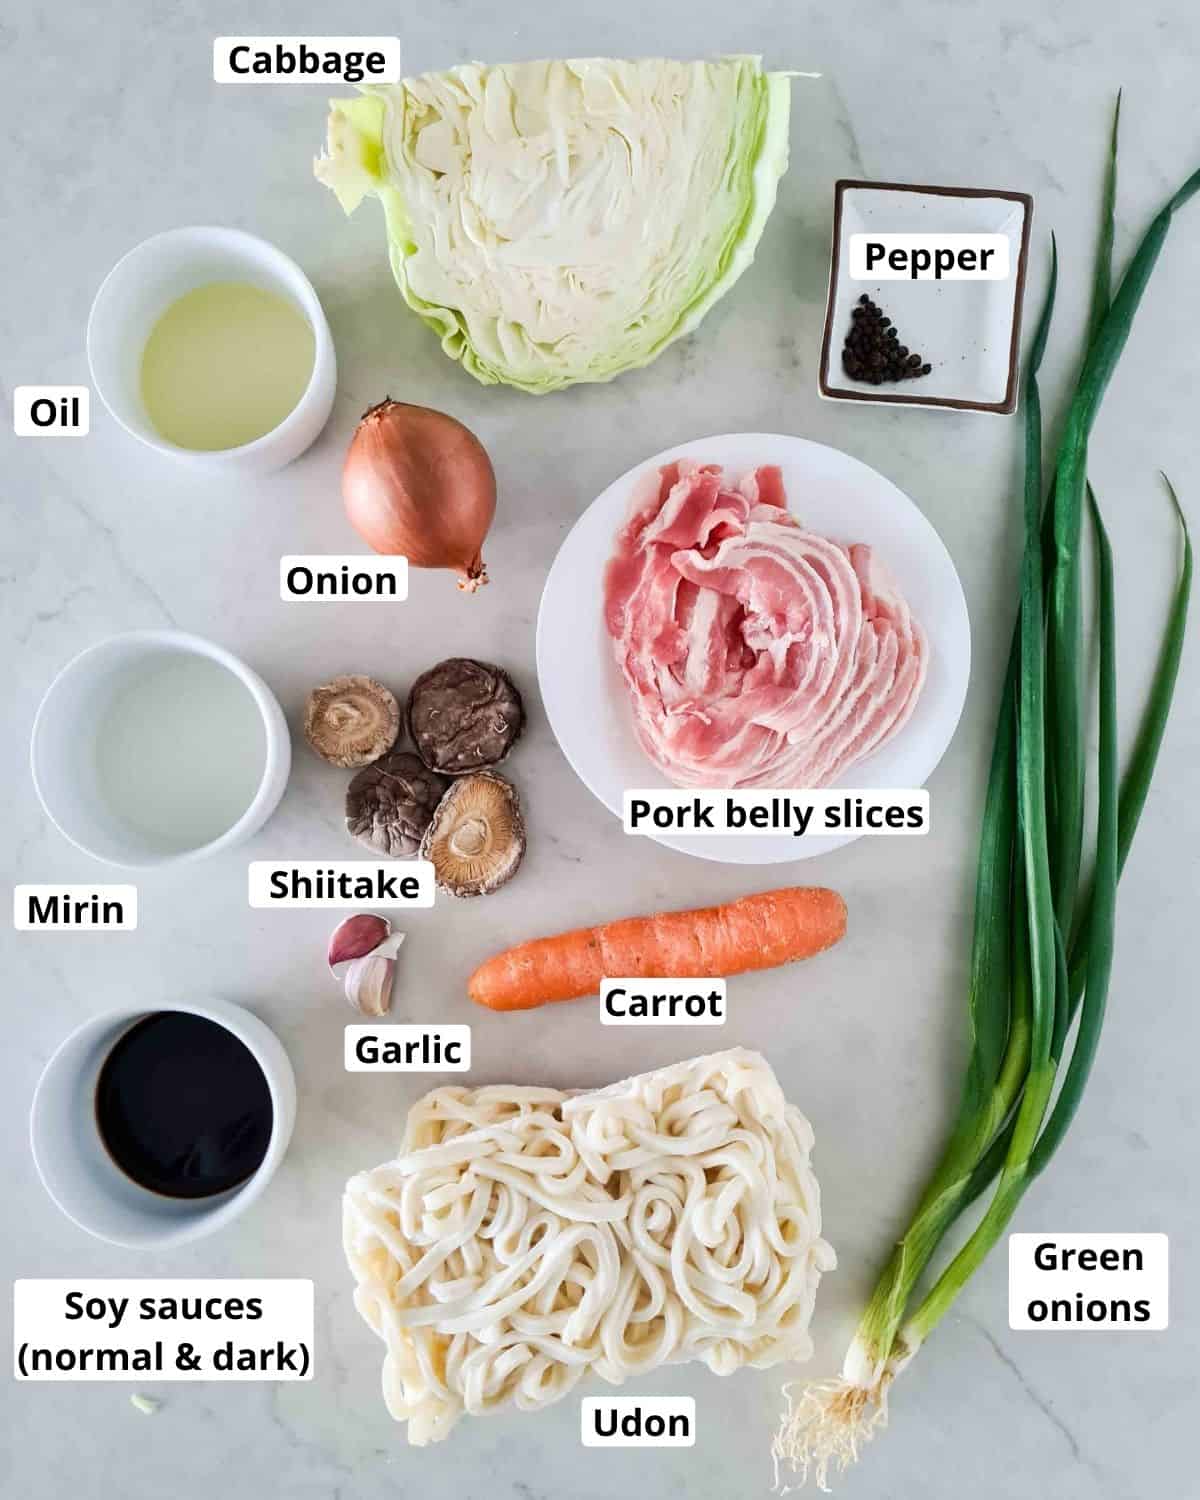 Ingredients required for this recipe, labeled